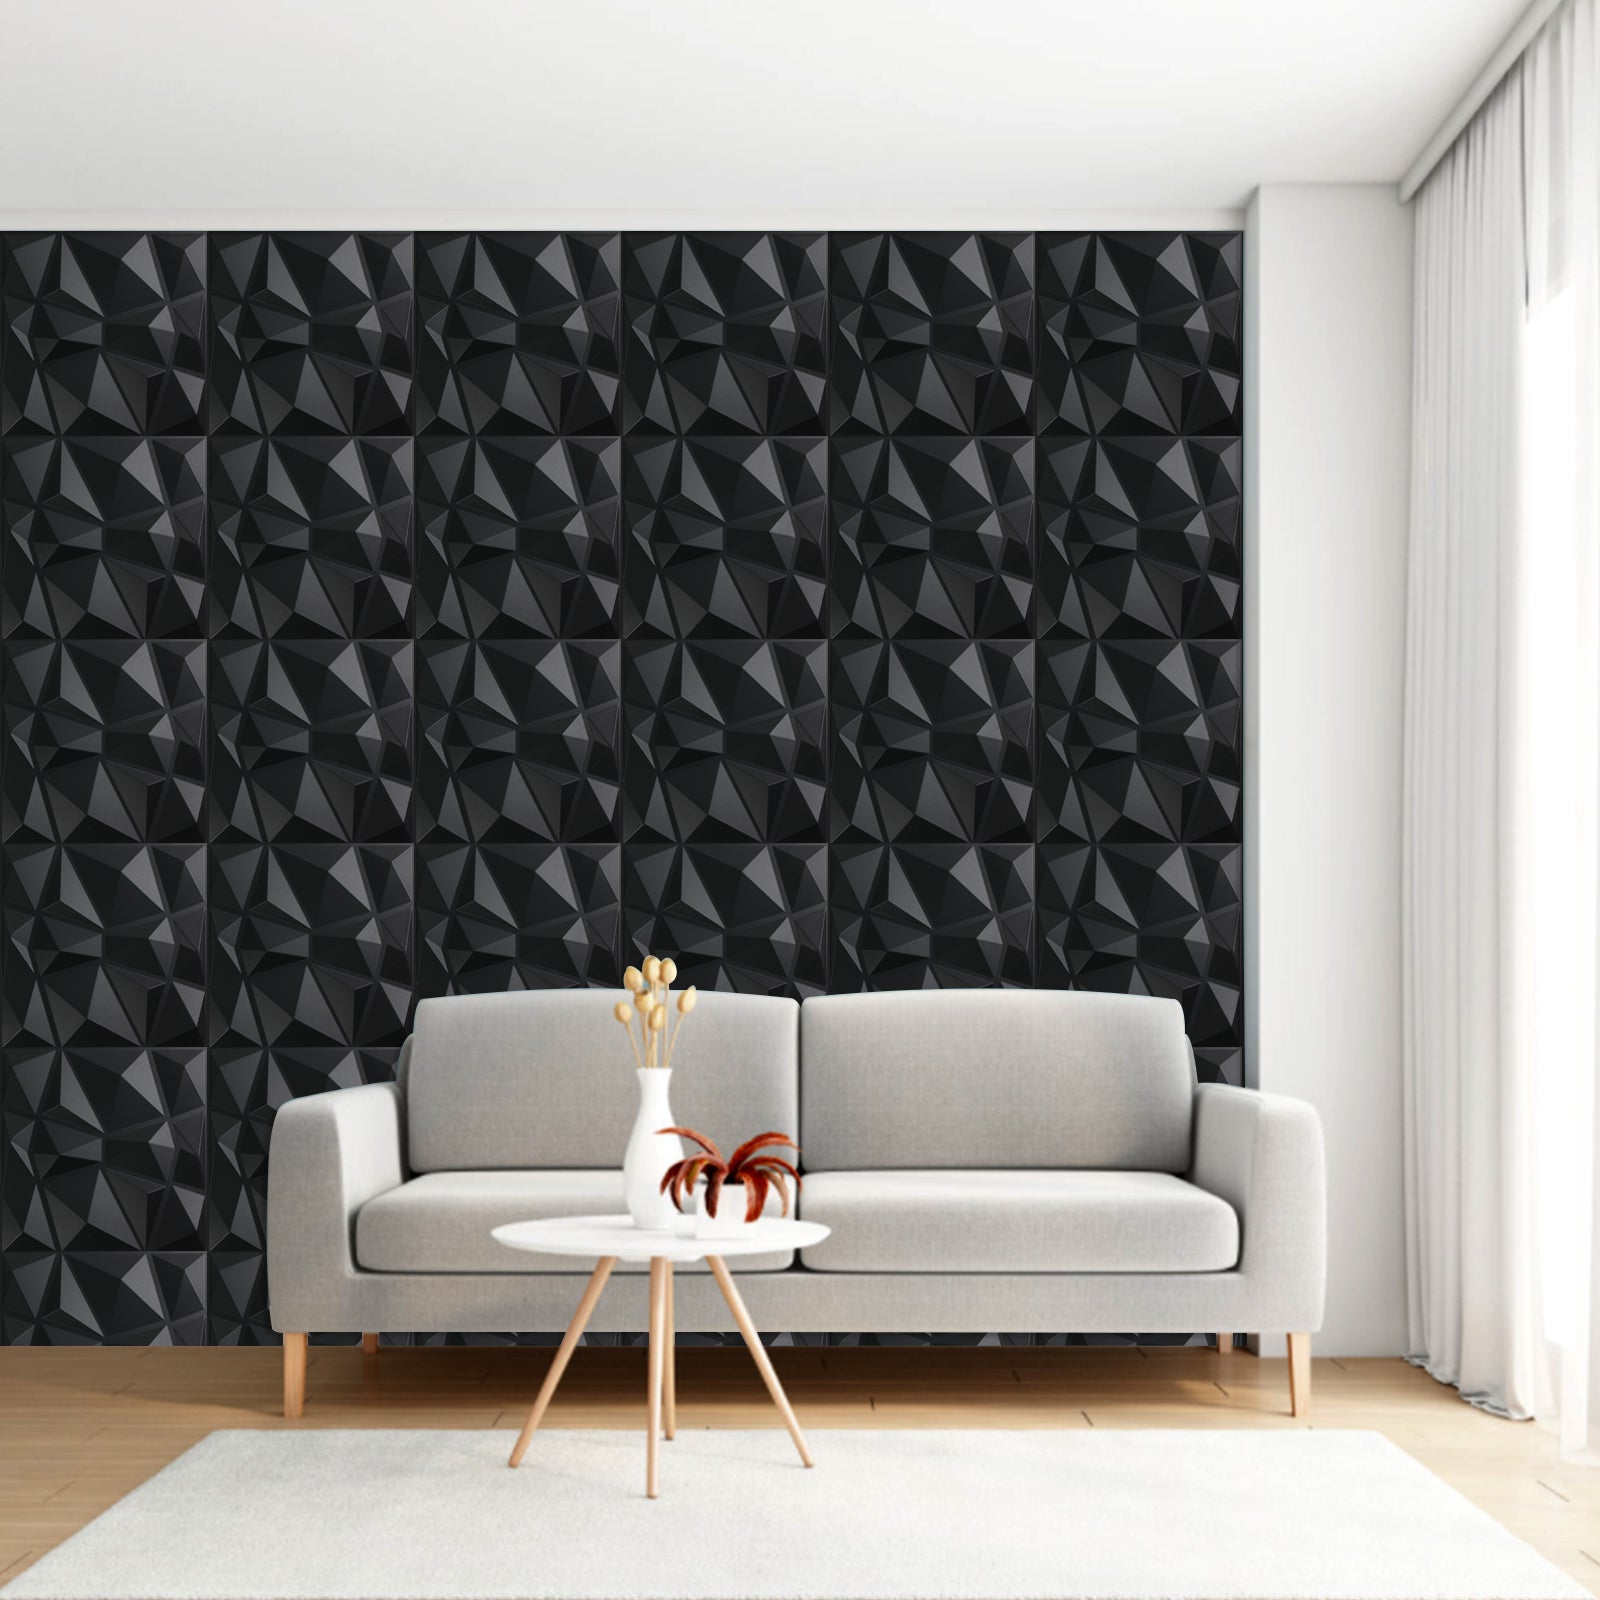 3D wall panels stick on living room